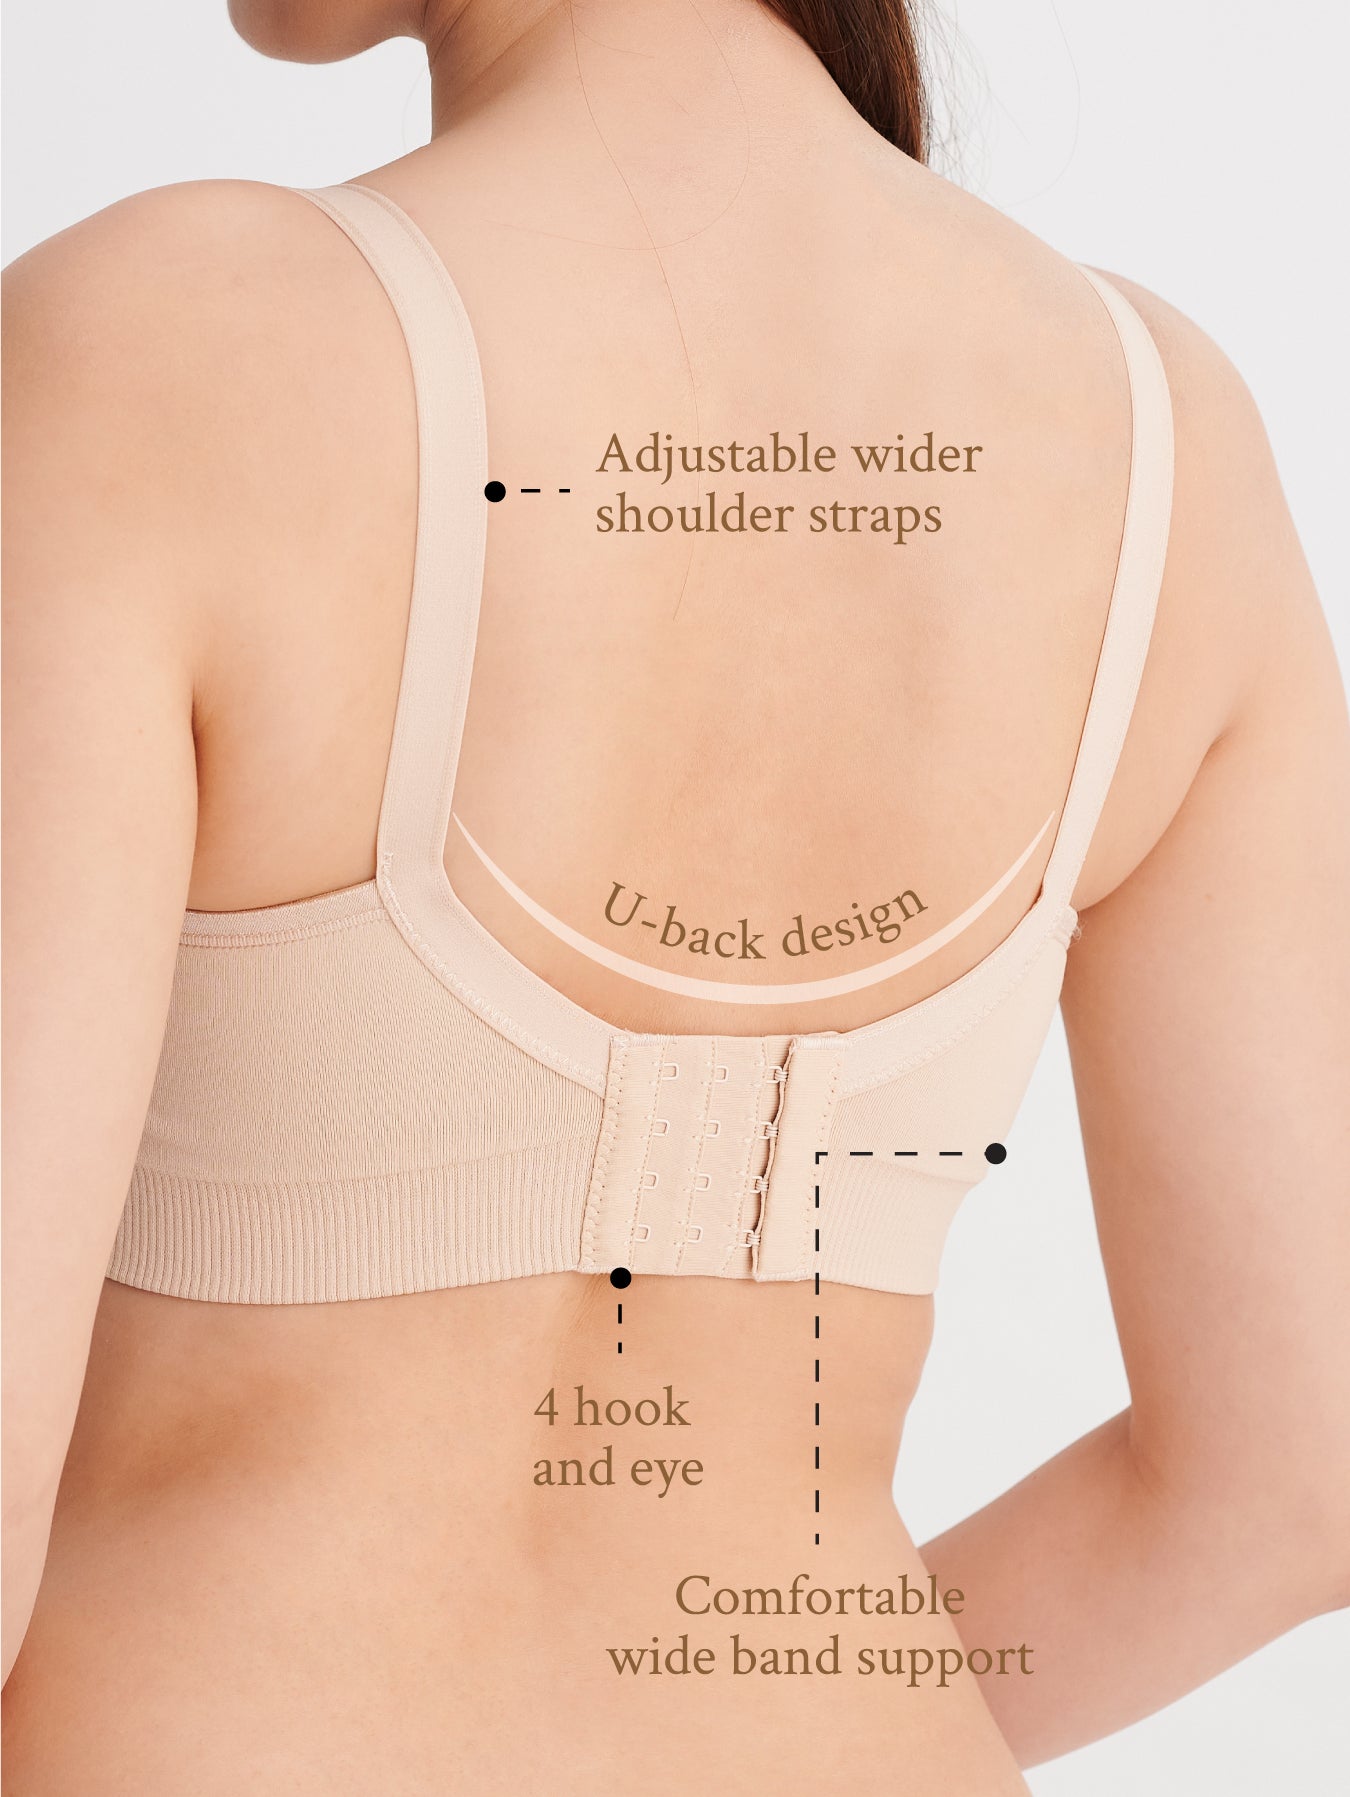 Nursing bra with easy-to-use up-way open feature